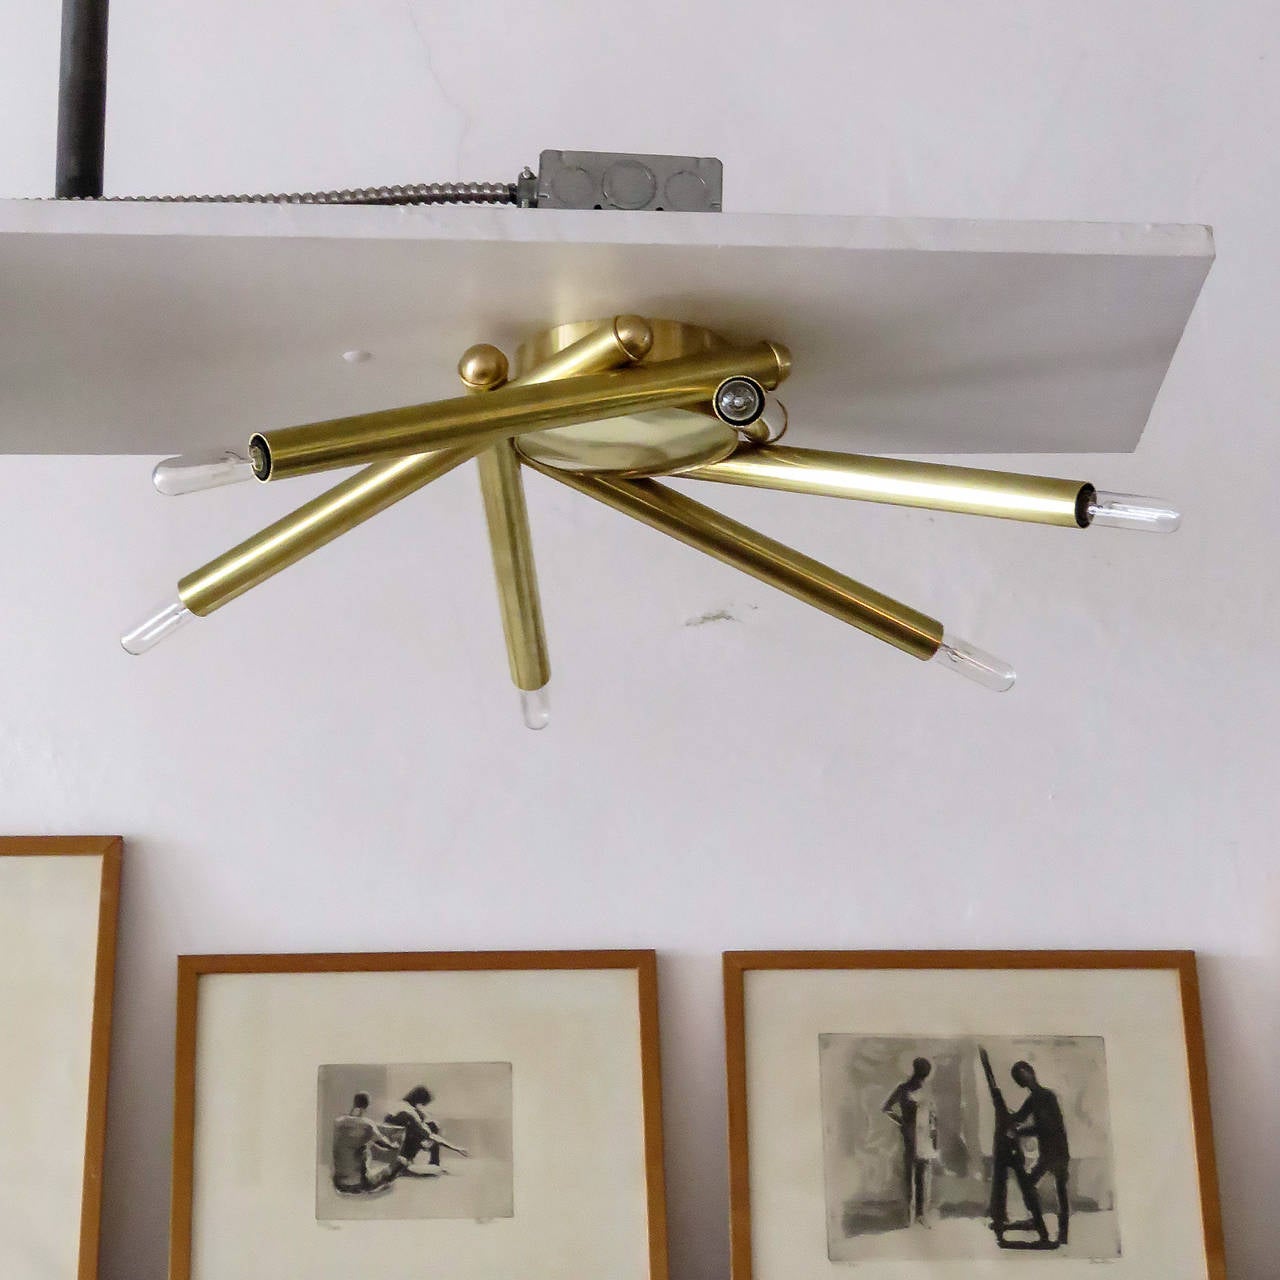 stunning six light flushmount light by Gallery L7, handcrafted and finished in Los Angeles from American brass in raw brass finish, 24 inch diameter, can be used as wall or ceiling light, available in different sizes and finishes, six E12 sockets